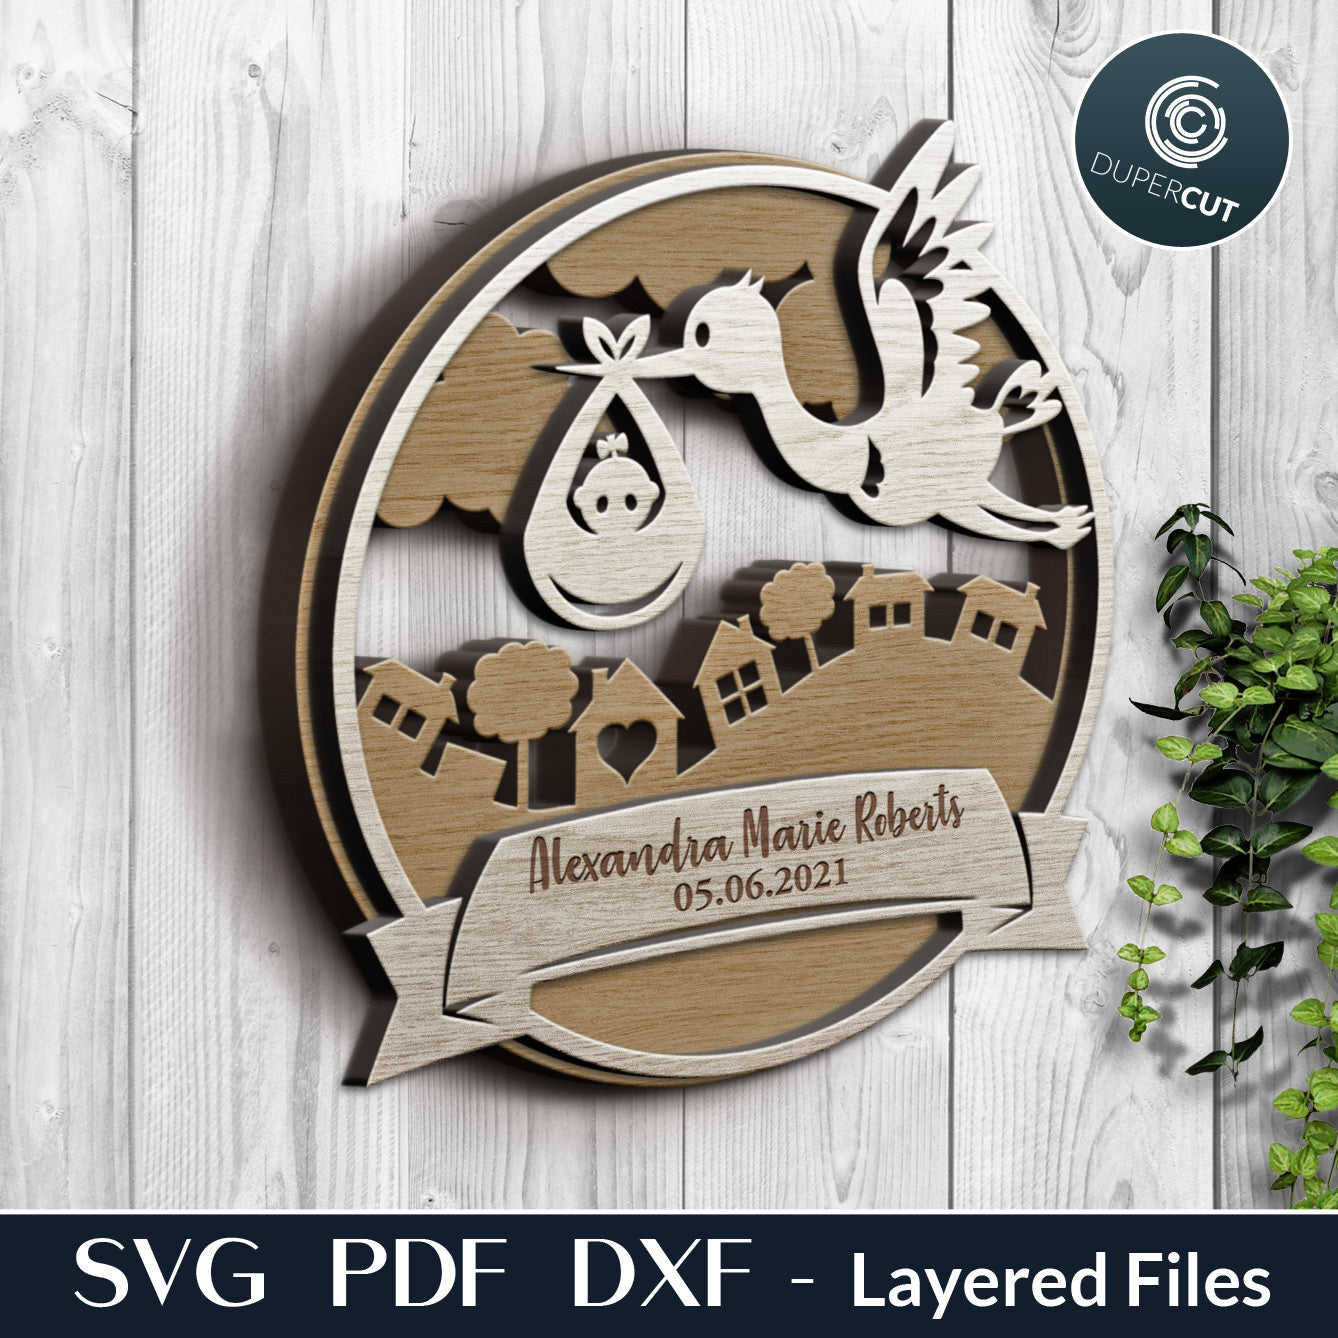 Personalised new baby scene - stork delivering newborn - layered files. SVG PDF DXF template for laser cutting for Glowforge, CNC plasma machines.